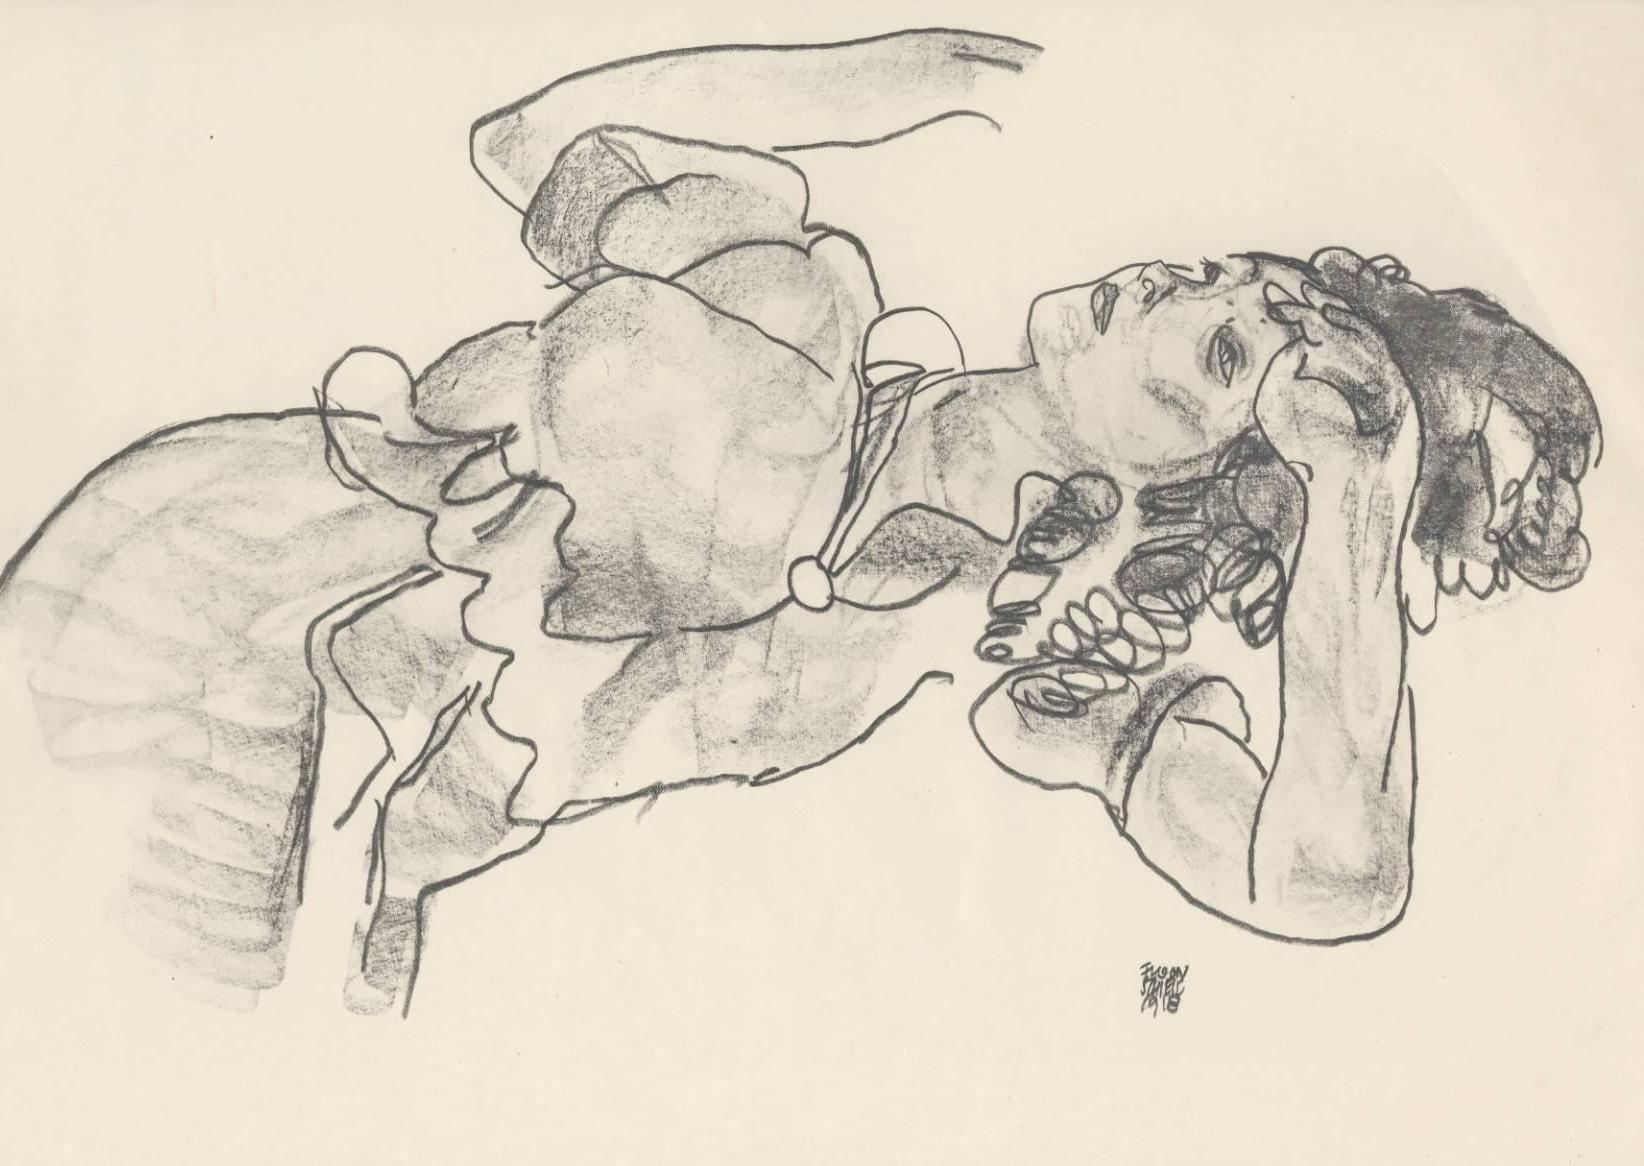 Reclining Girl, Half-Figure (Sketch Folio) after Egon Schiele, 1920 Collotype - Print by (after) Egon Schiele